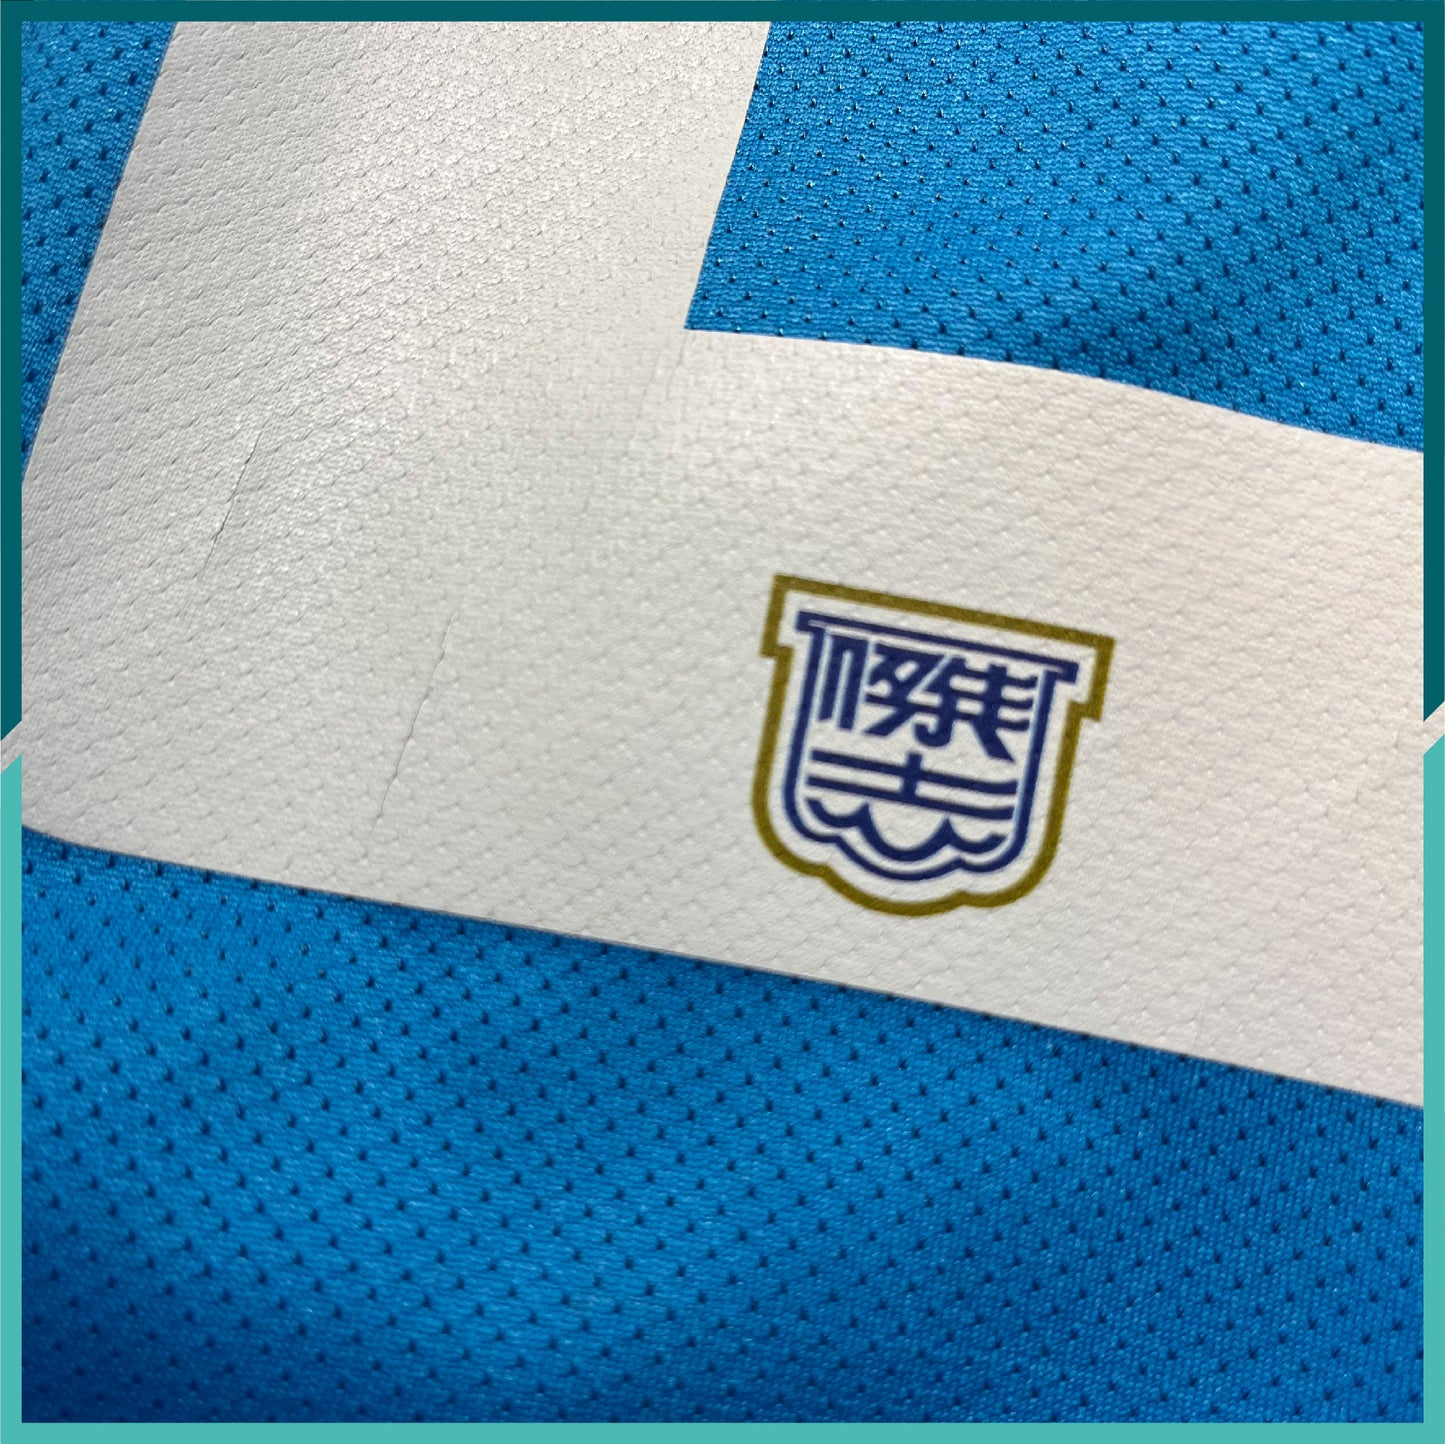 2010-11 Kitchee SC Home Jersey